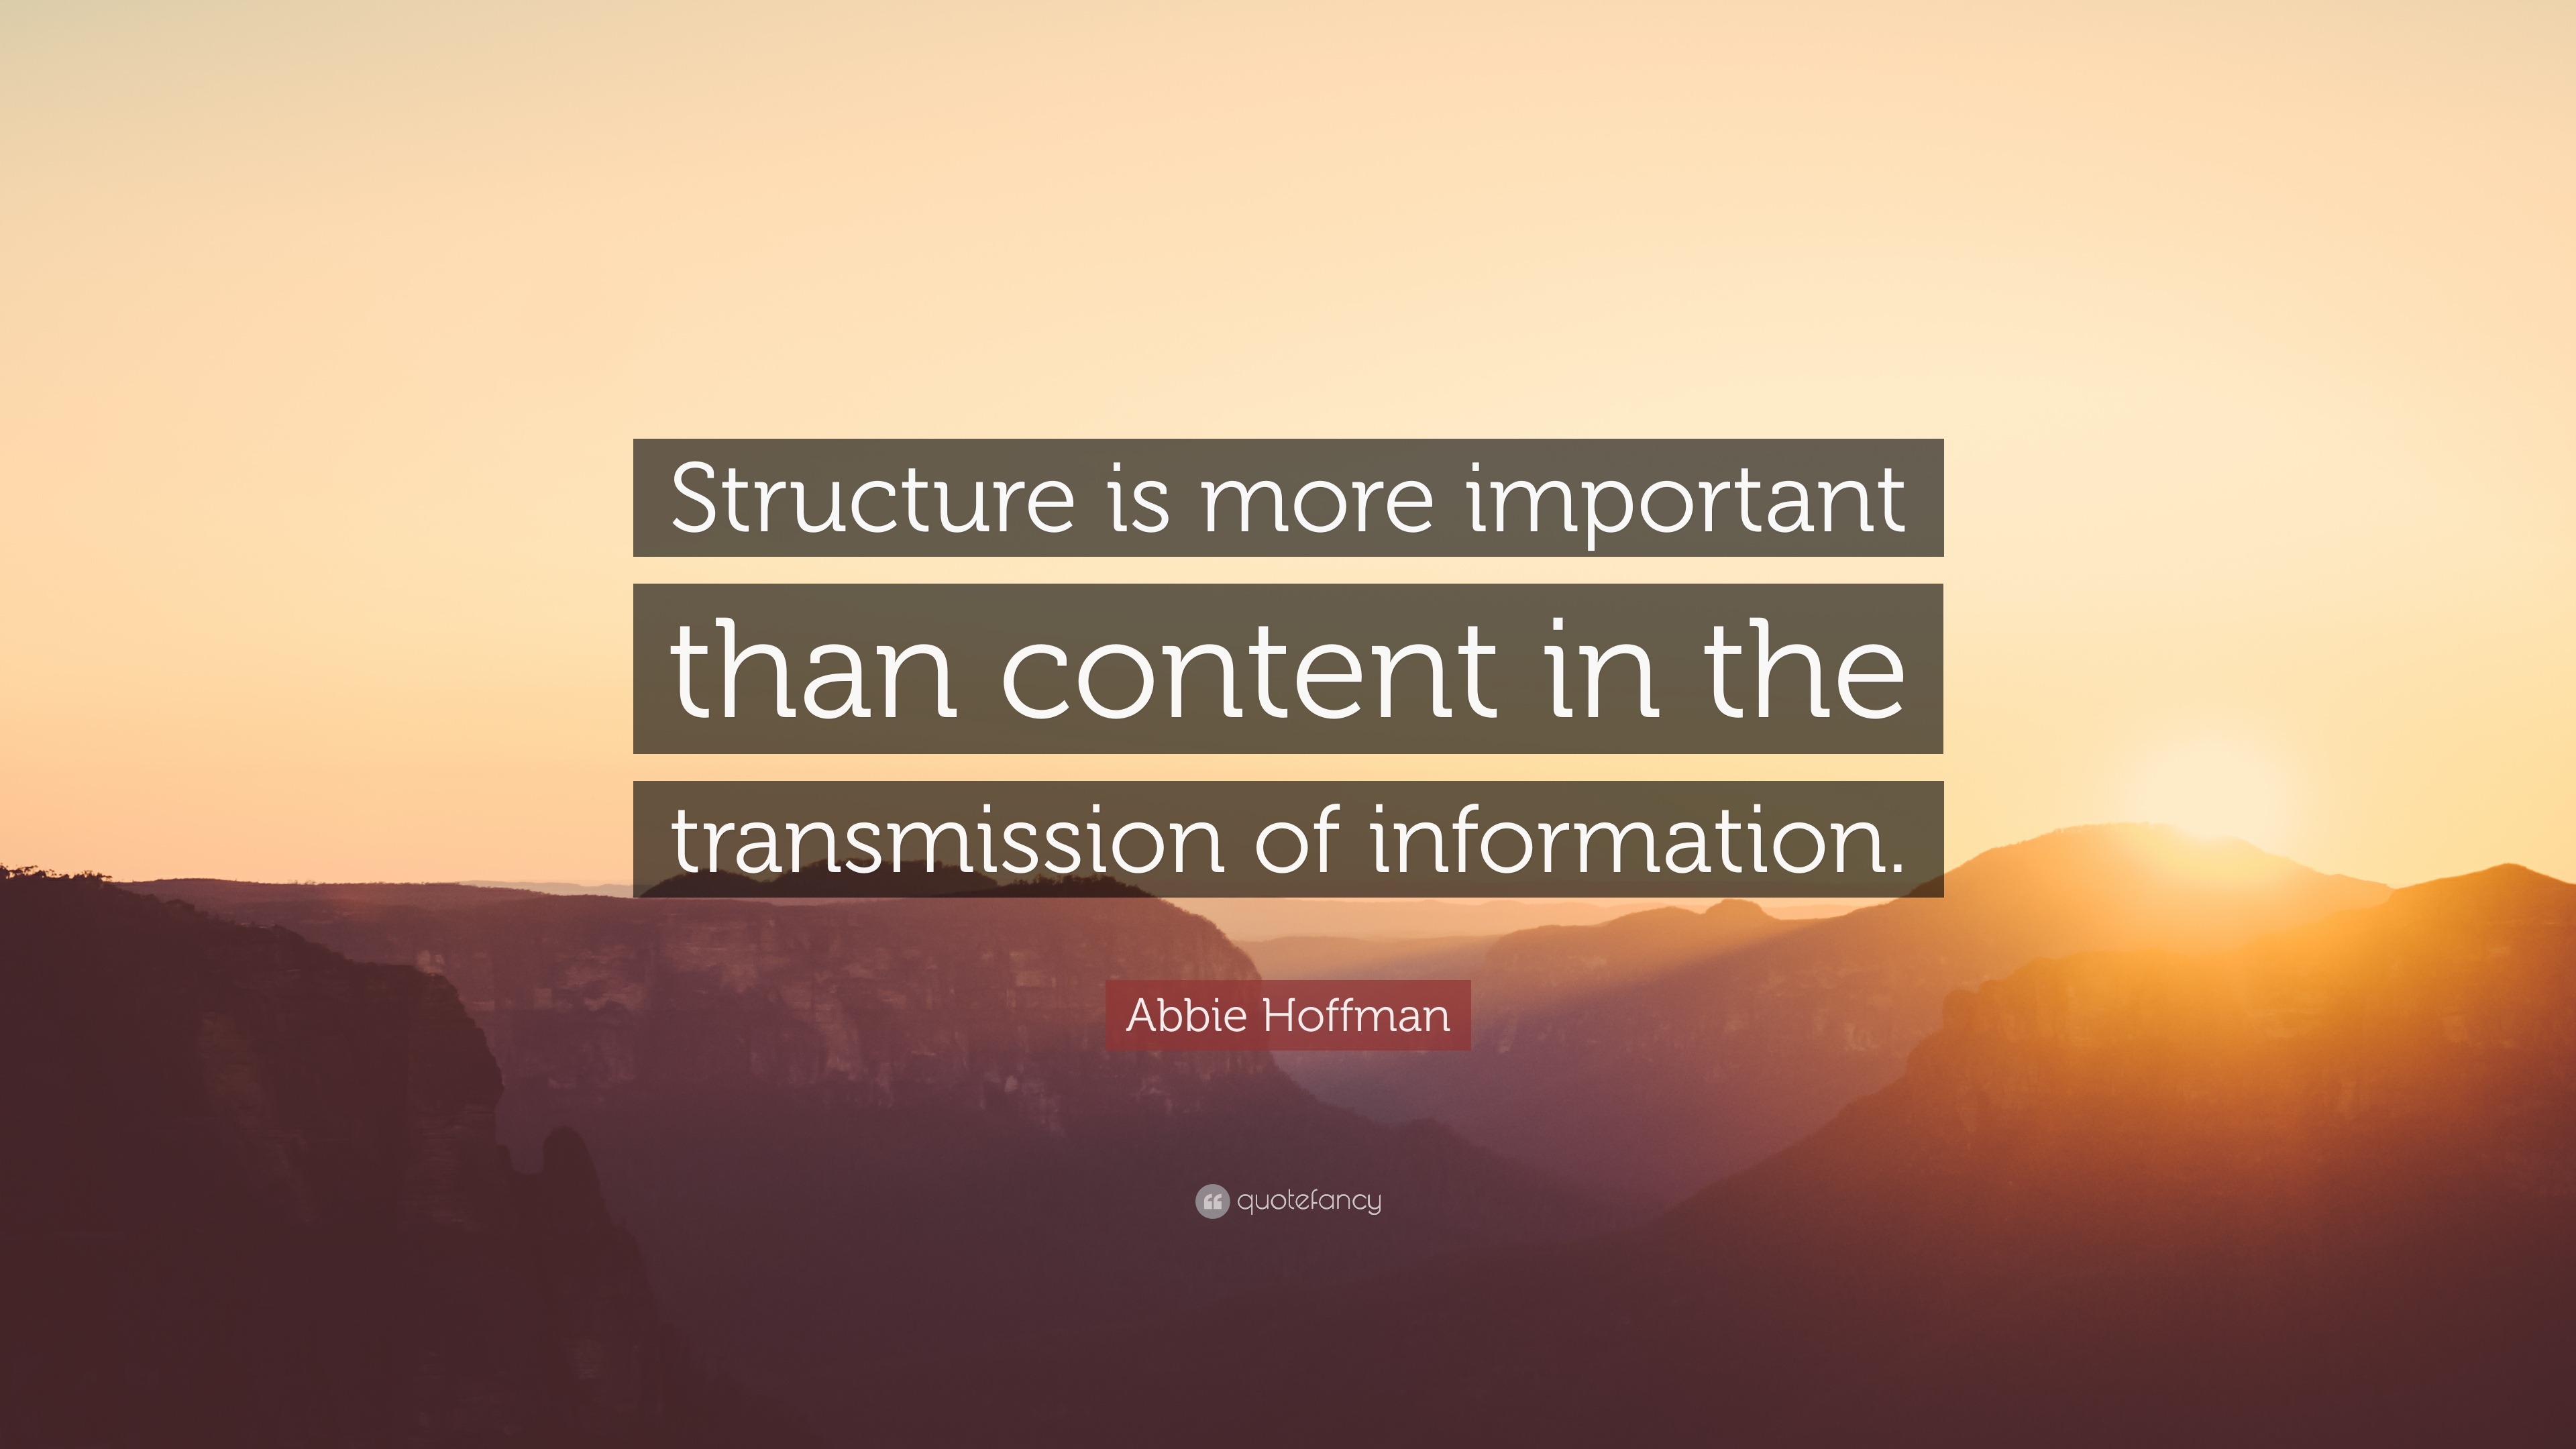 Abbie Hoffman Quote: “Structure is more important than content in the  transmission of information.”